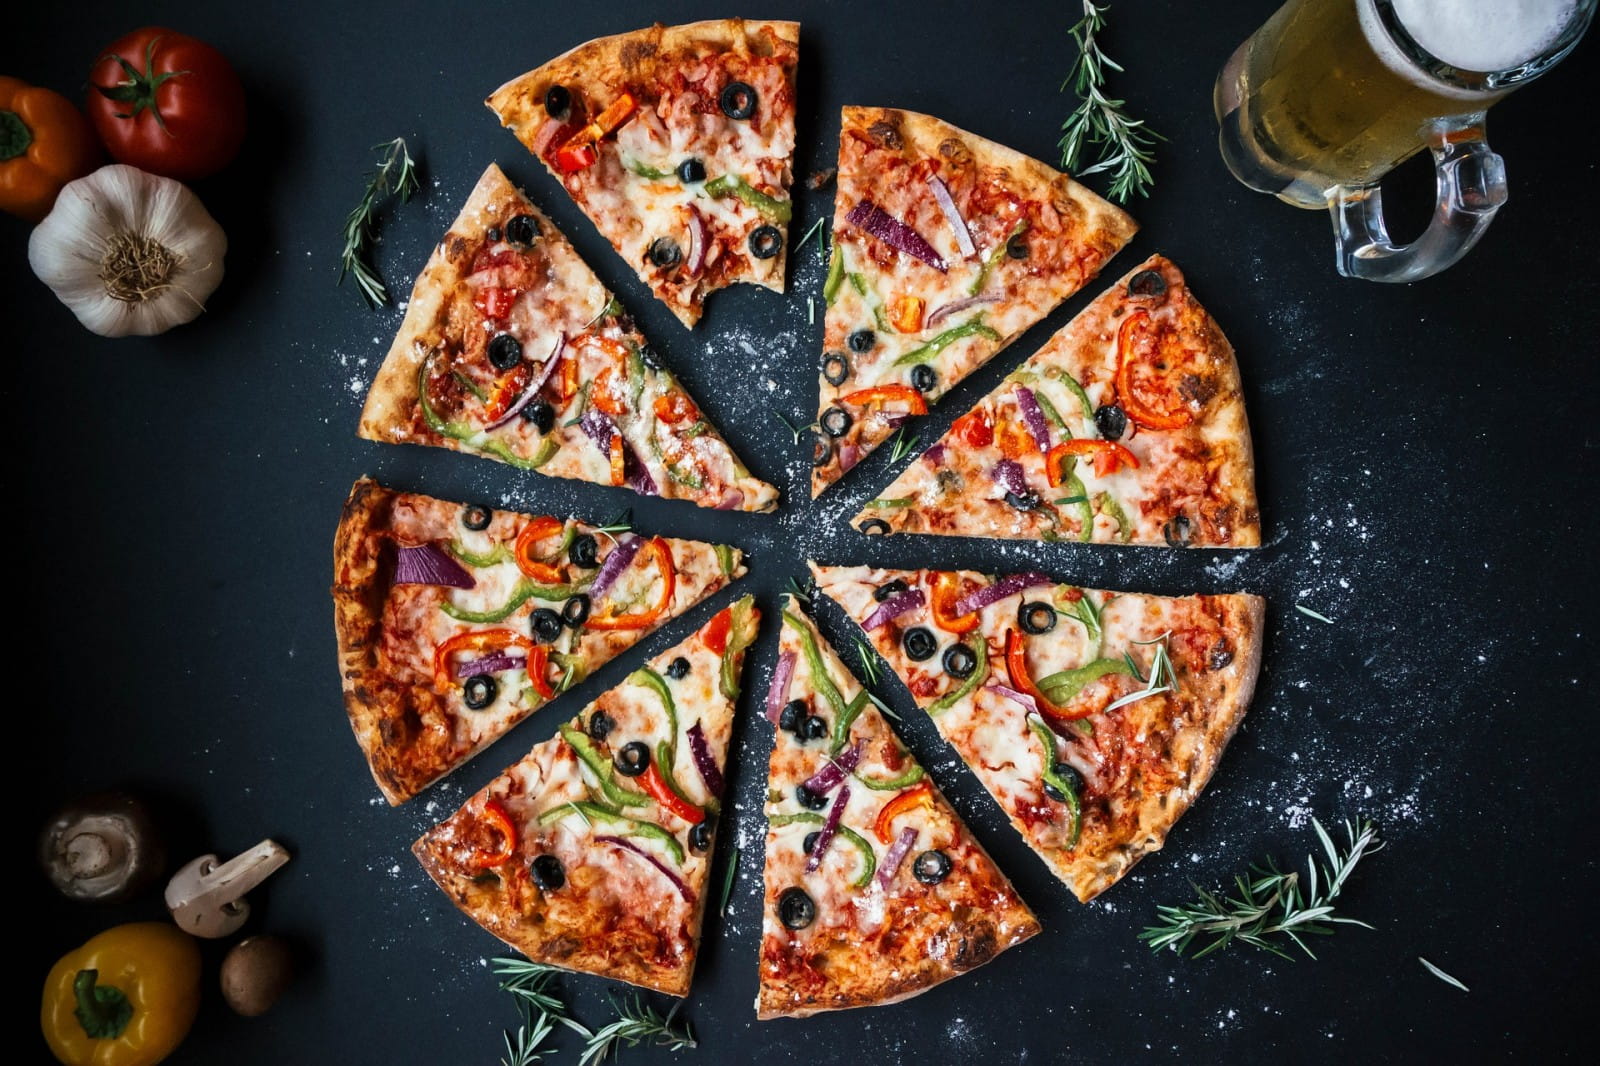 The best wine and beer pairings for pizza